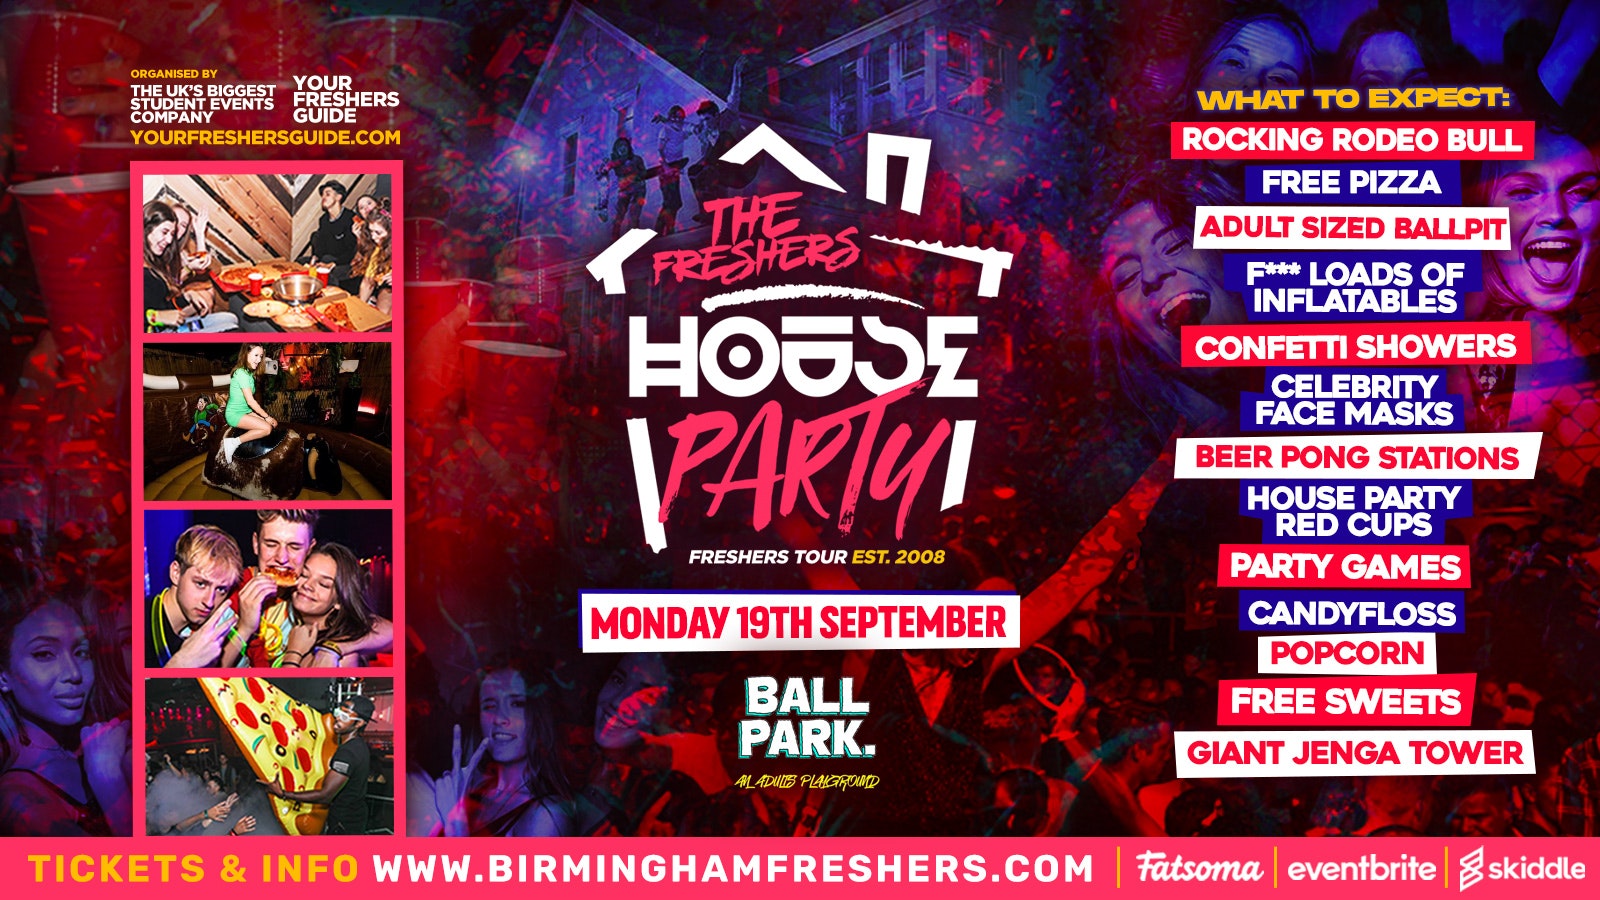 The Freshers House Party – Birmingham’s Biggest Freshers Ballpit Rave | Birmingham Freshers 2022